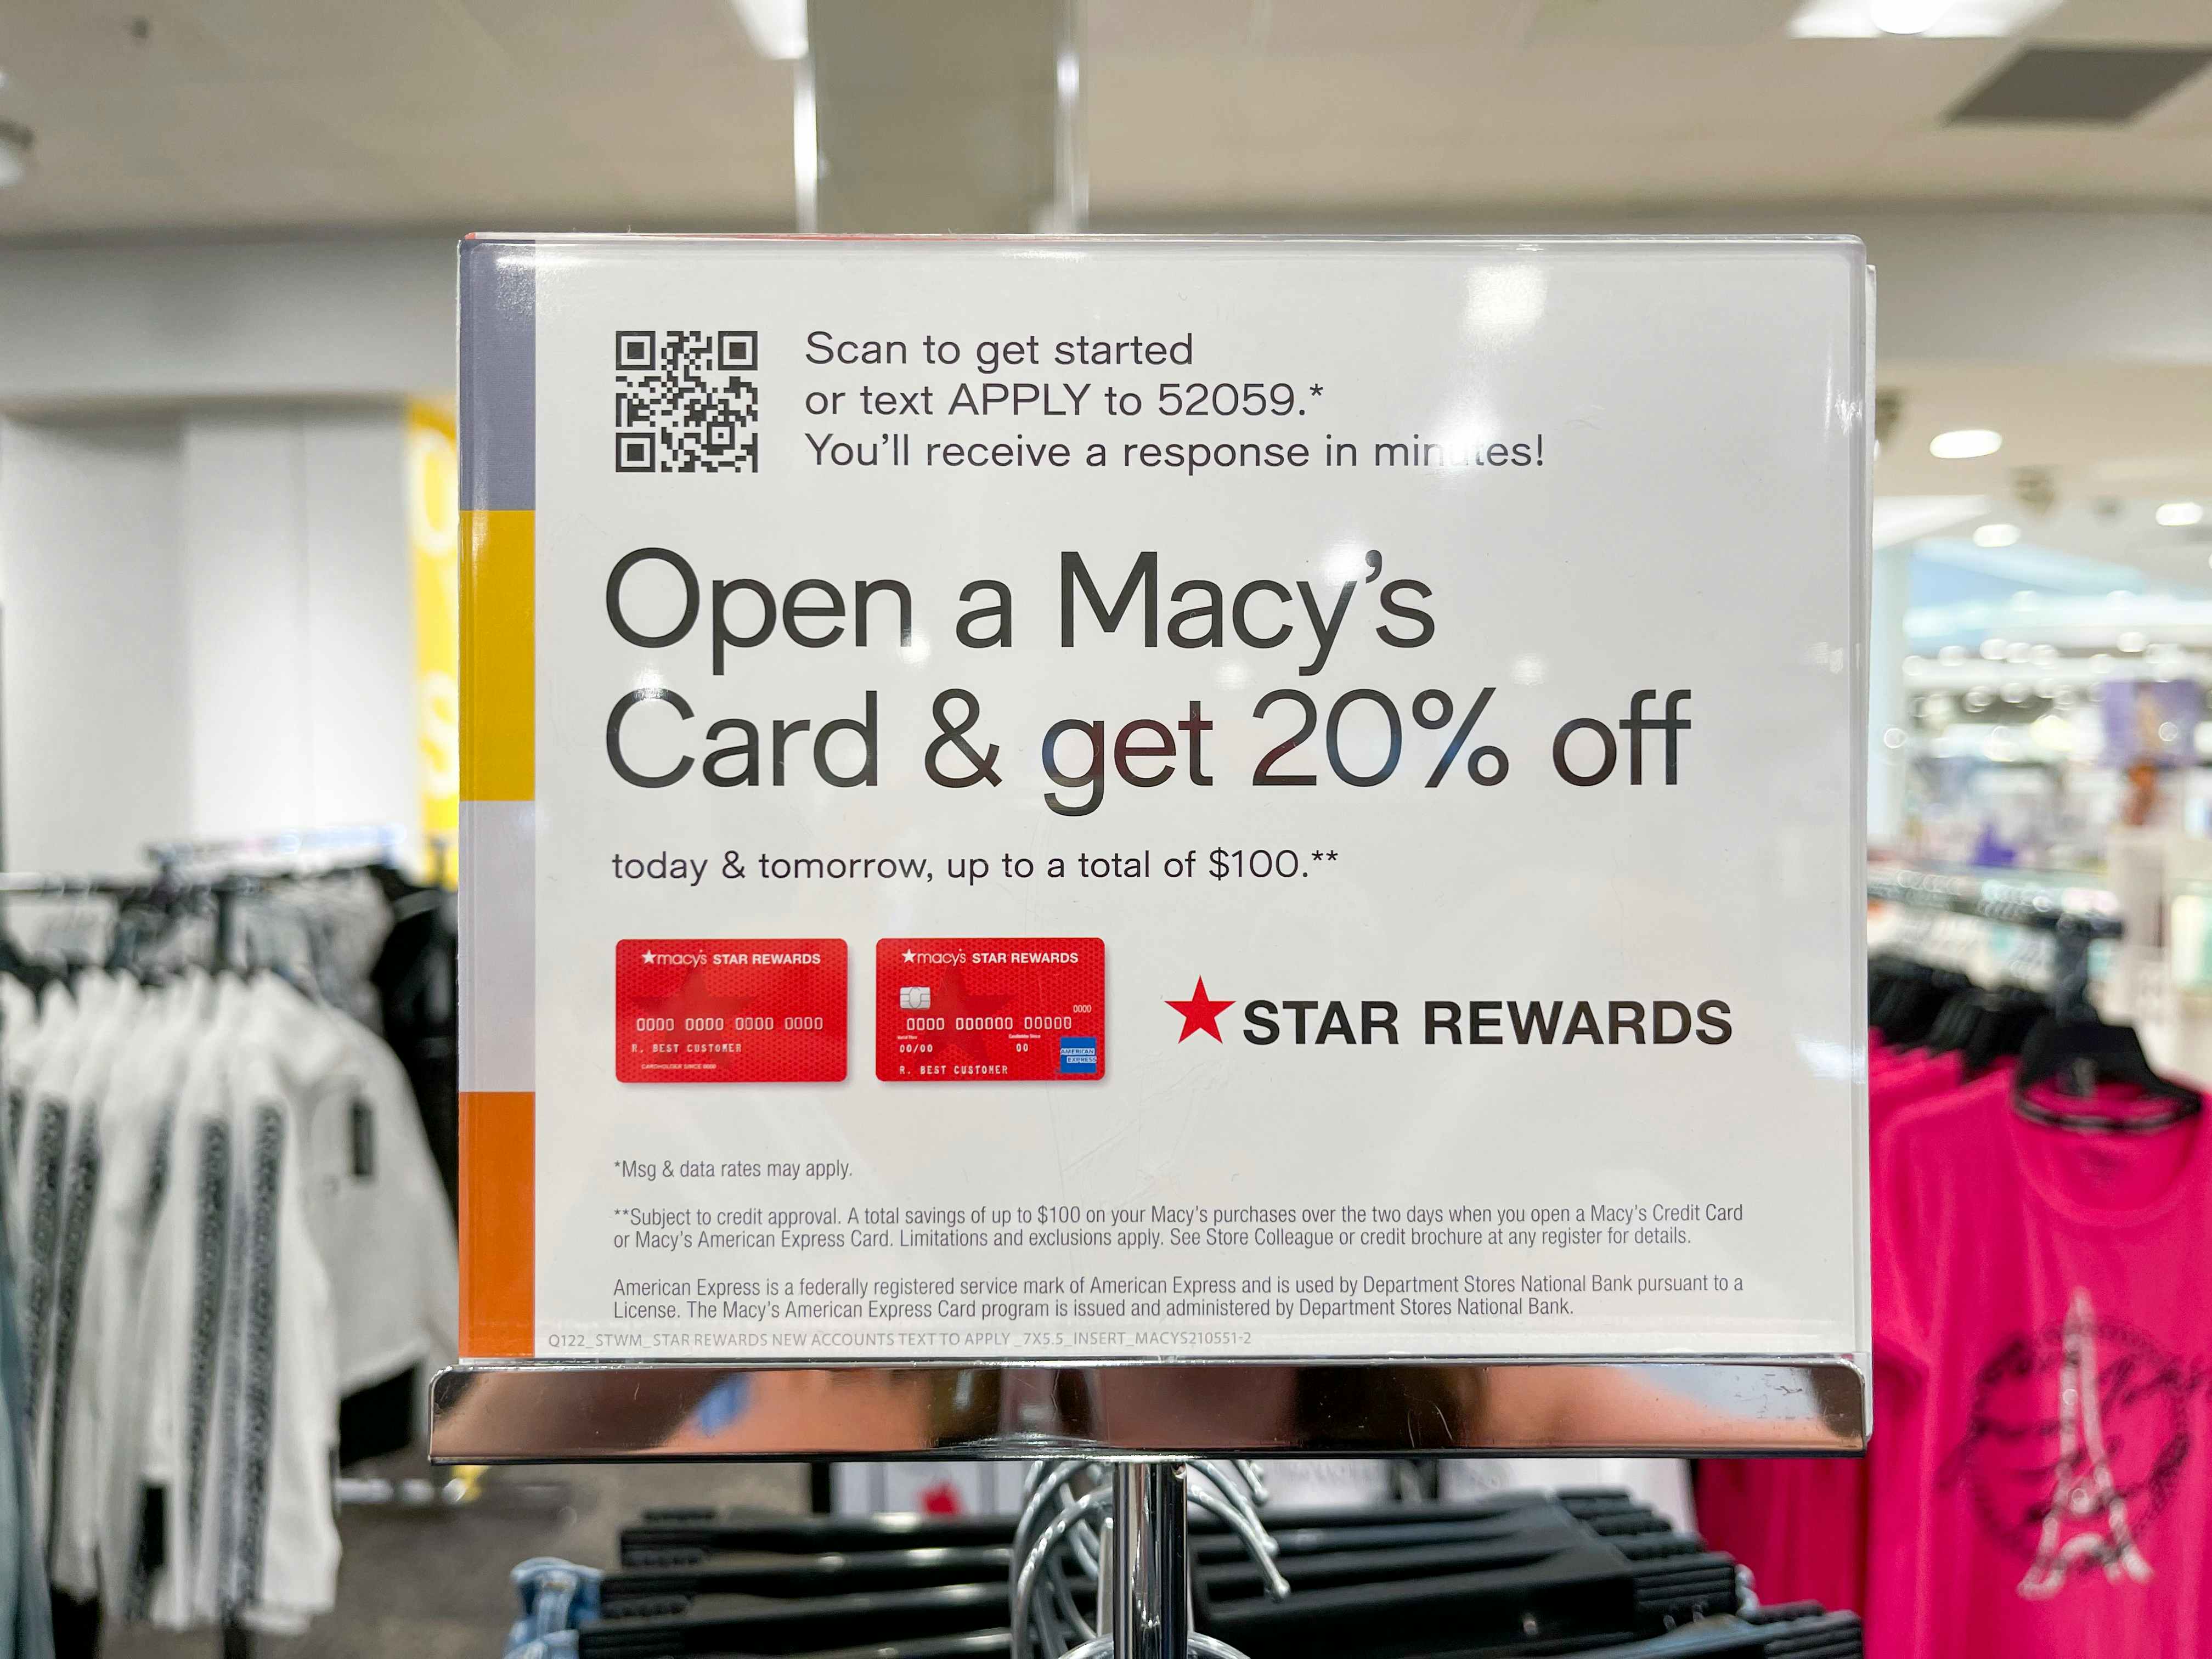 a sign at a Macy's store promoting 20% off when you sign up for a Macy's Credit Card